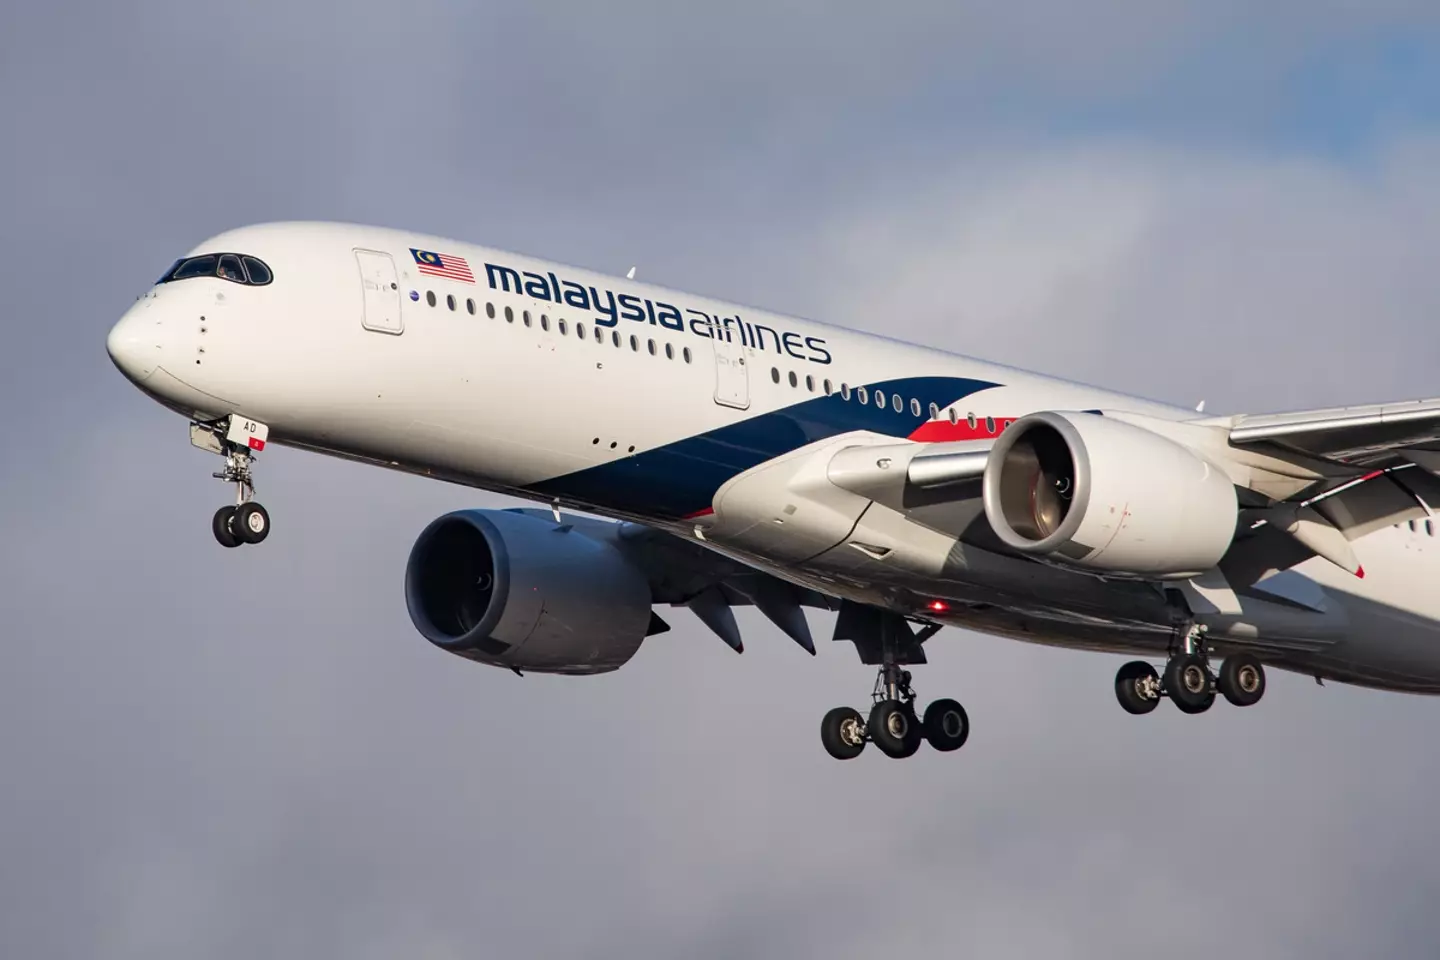 The MH370 plane has been missing for over nine years.